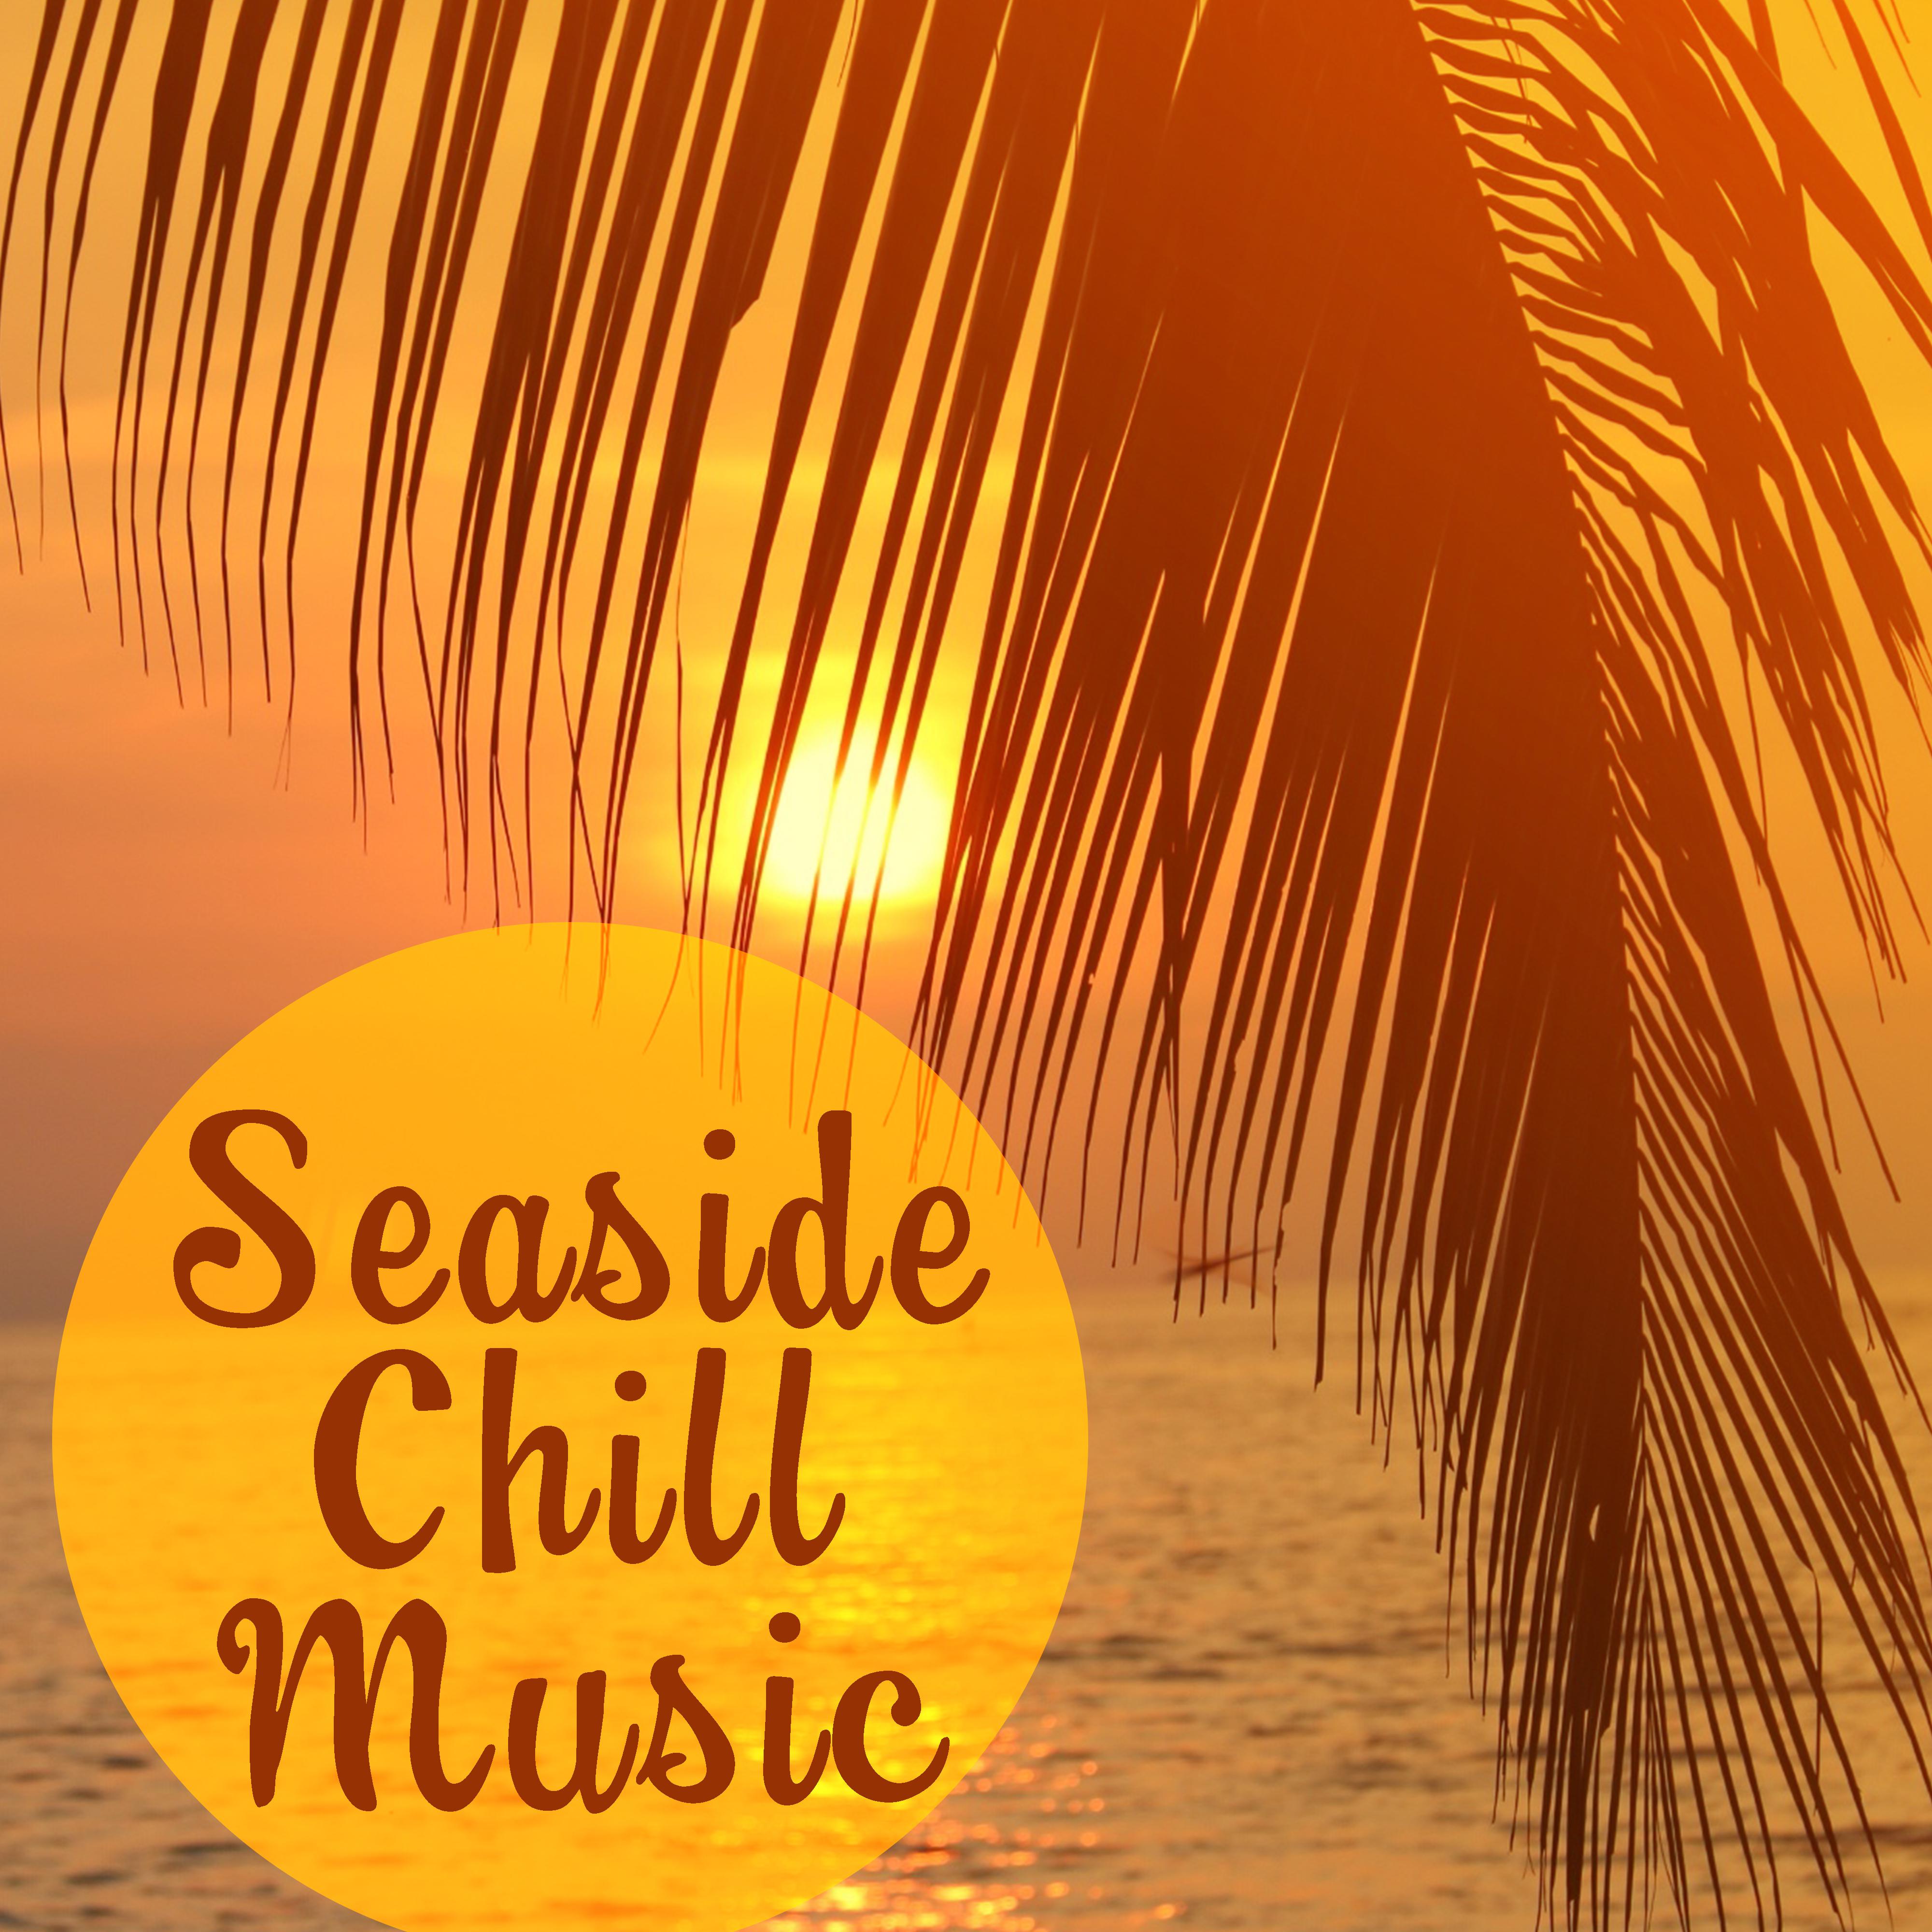 Seaside Chill Music  Calming Sounds to Relax, Easy Listening, Music for Mind Peace, Beautiful Sounds  Views